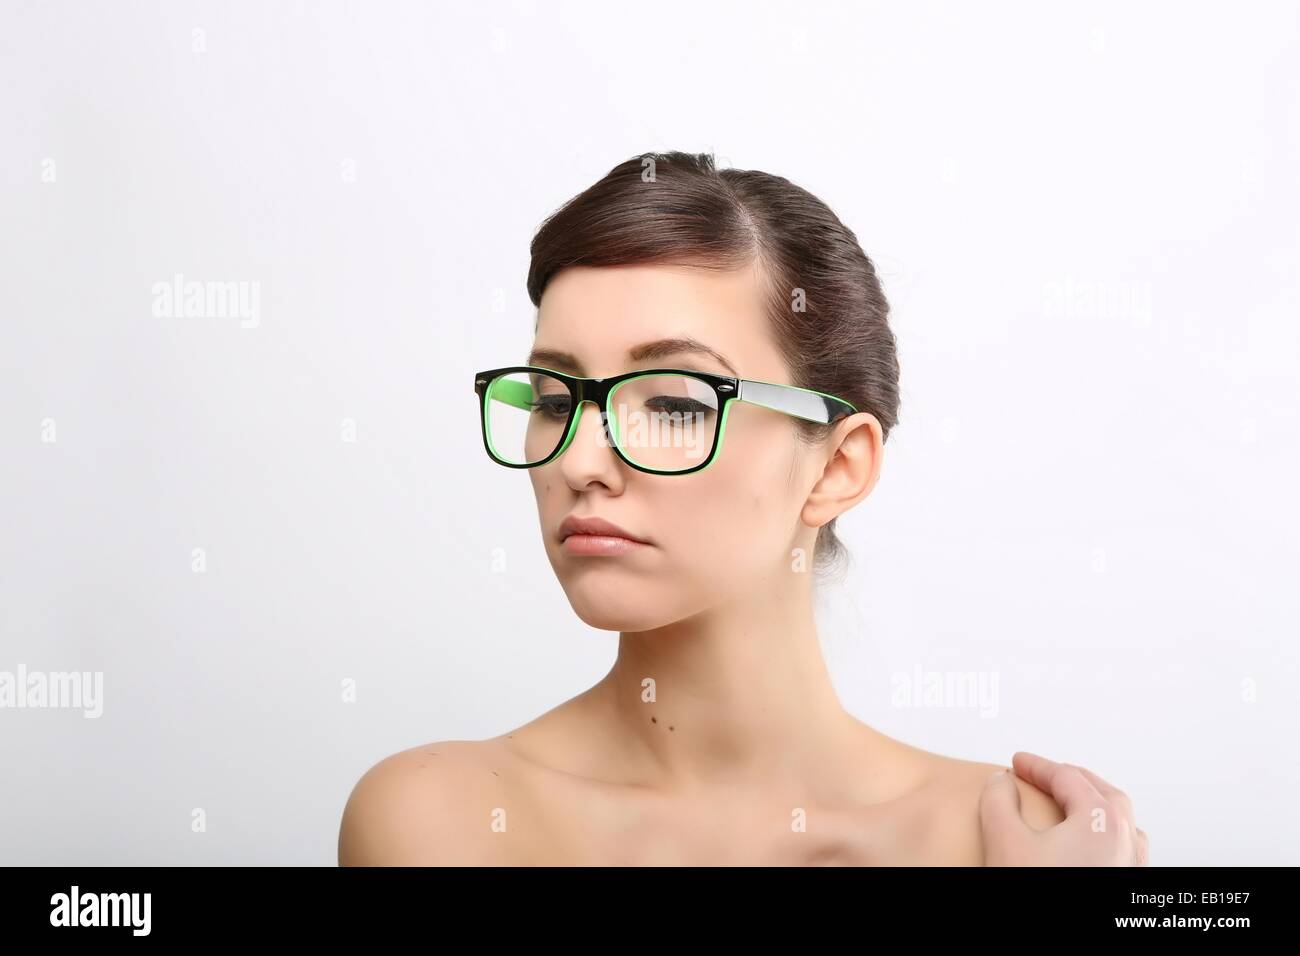 Young crazy nerd woman Stock Photo